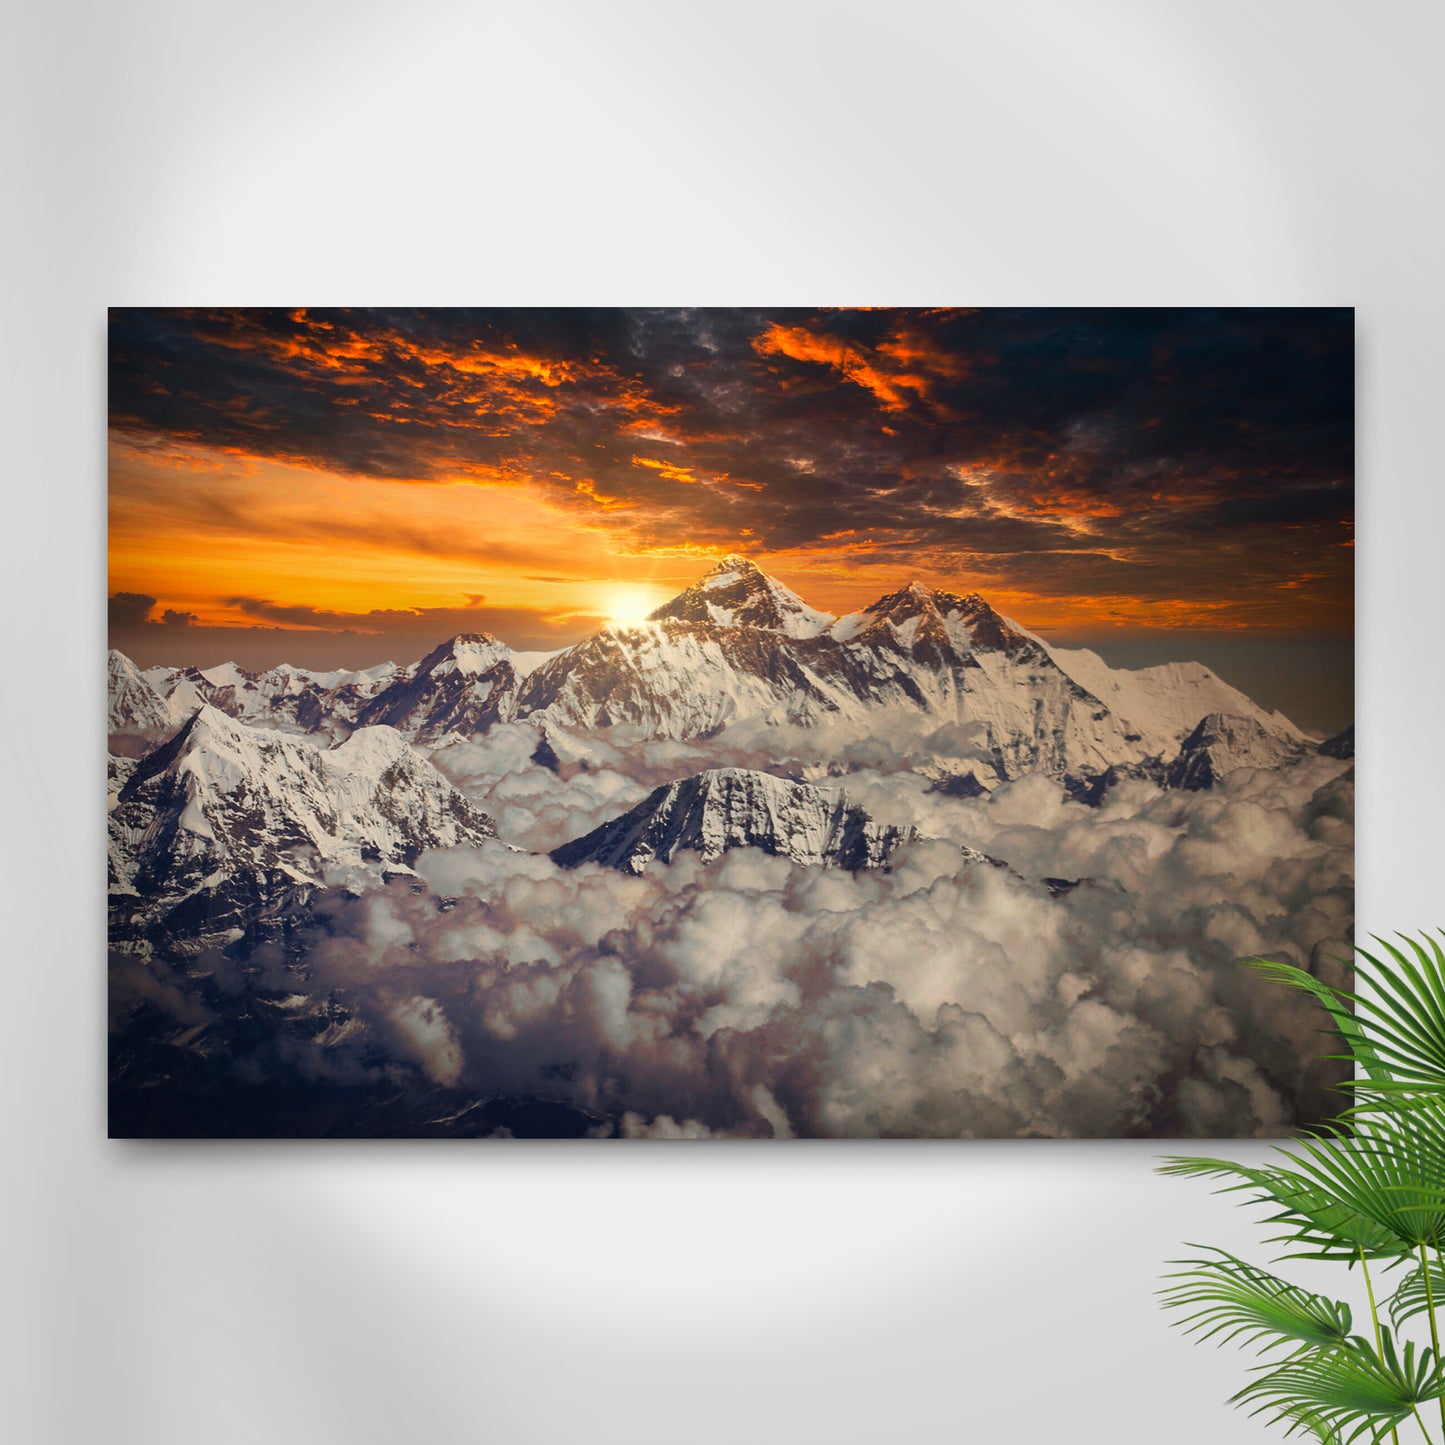 Snowy Mountain Peak Canvas Wall Art - Image by Tailored Canvases